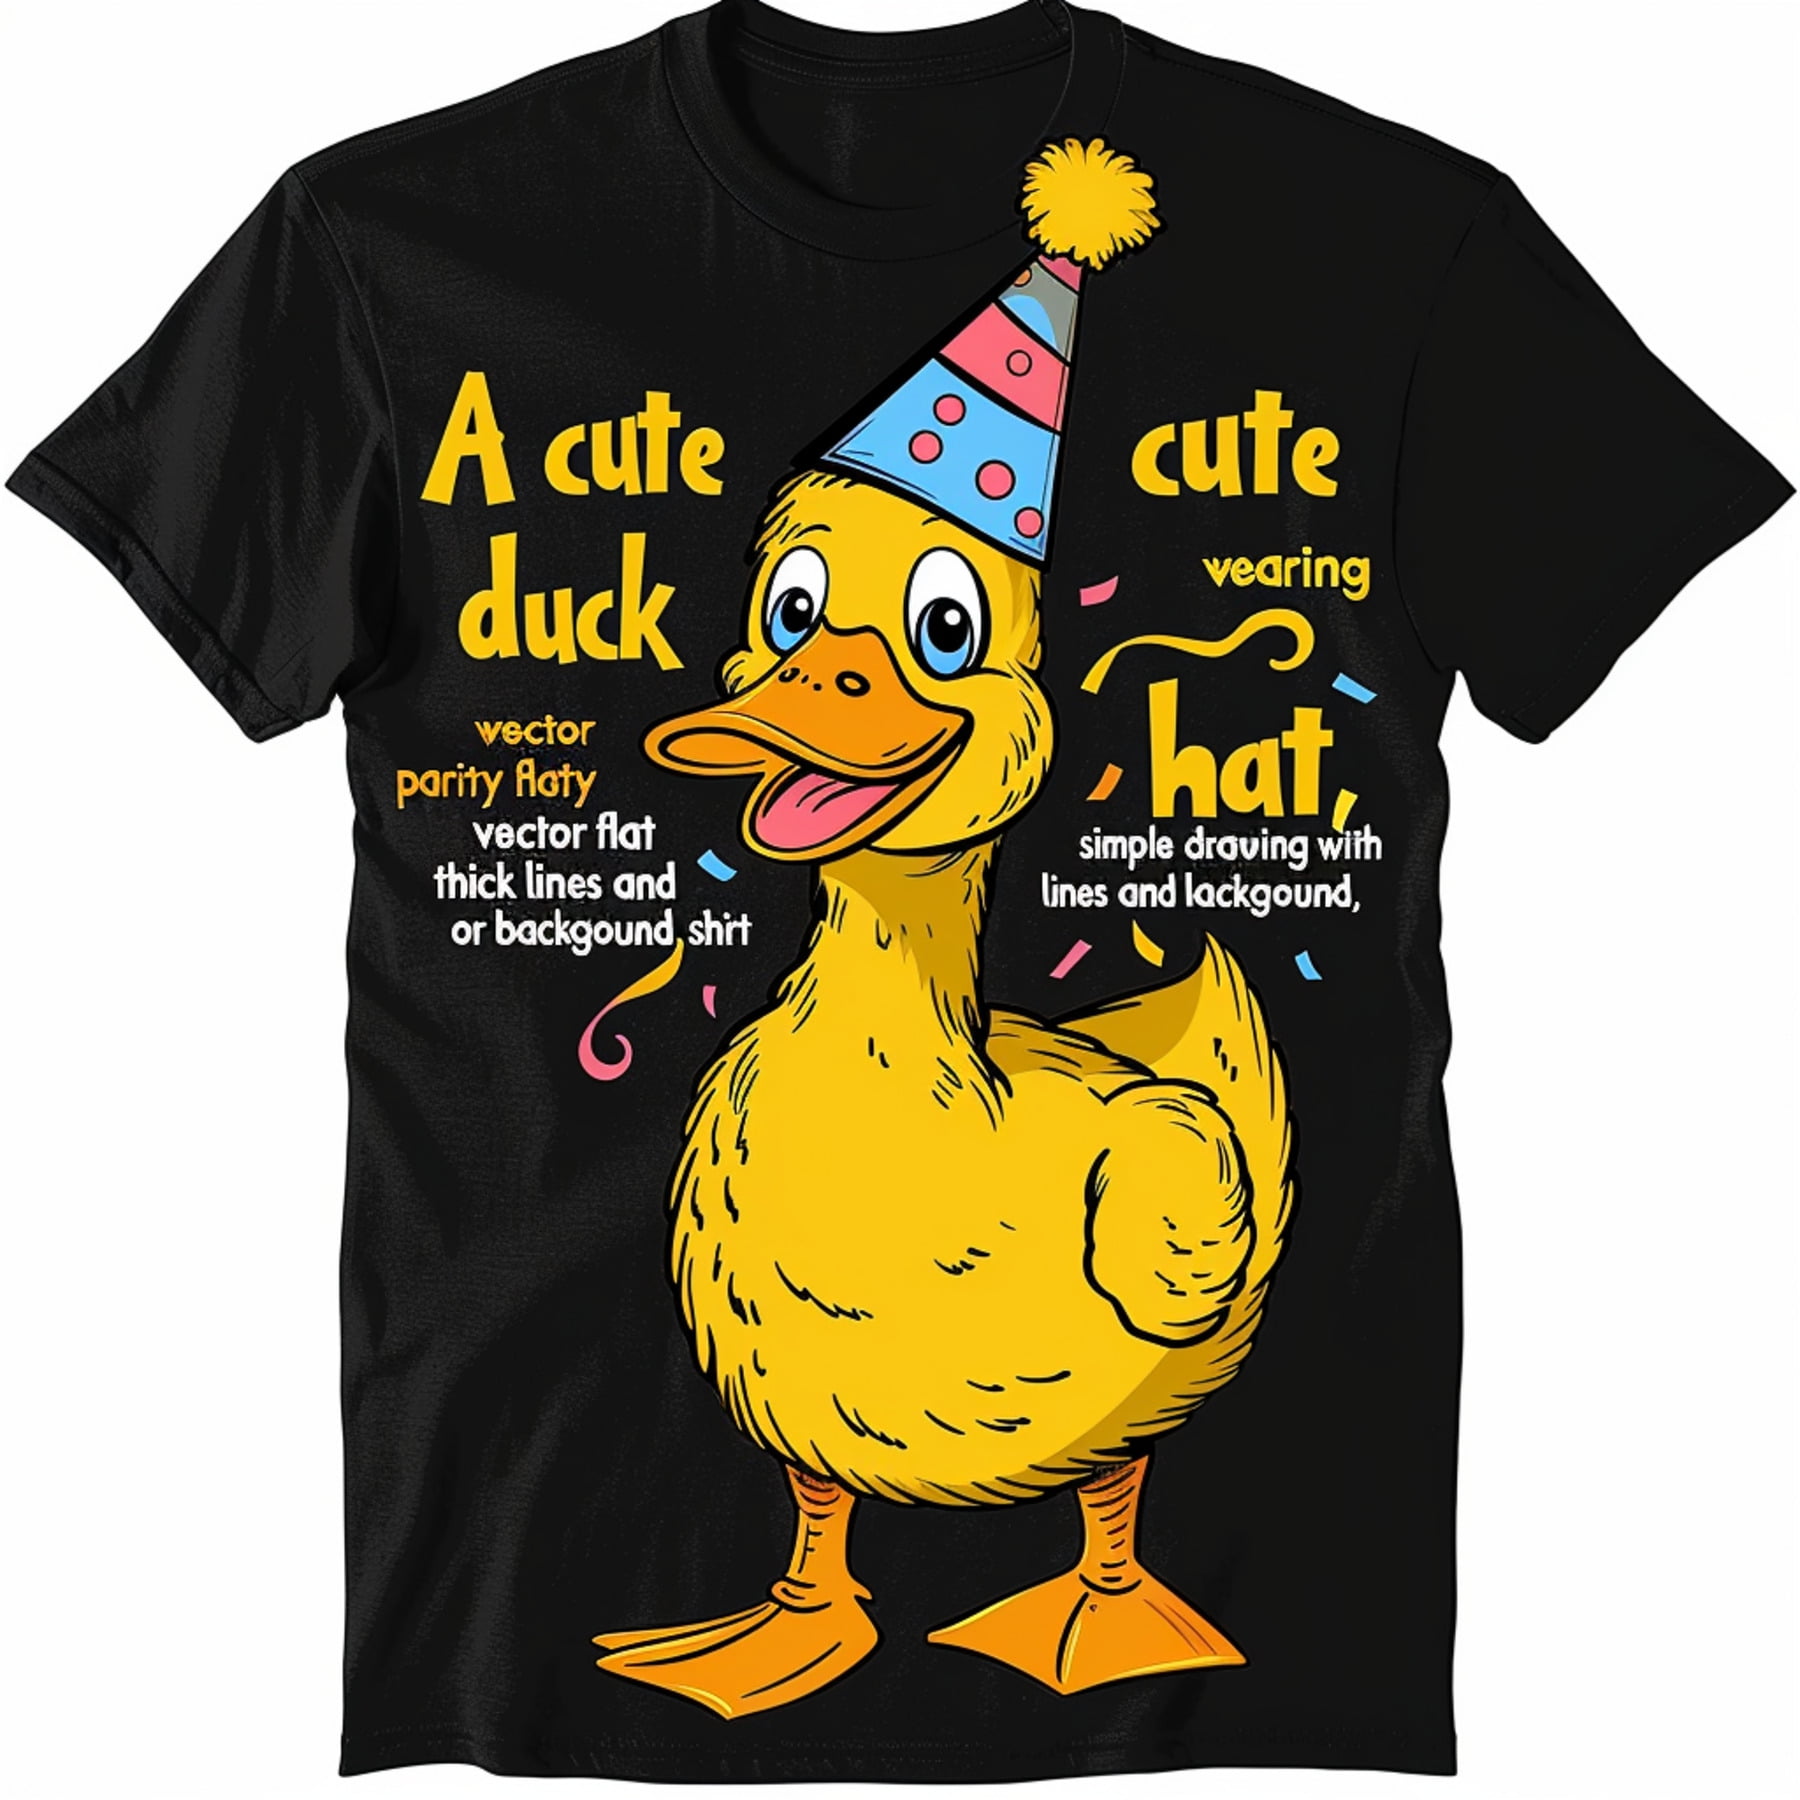 Adorable Duck in Party Hat Cartoon Design Black TShirt for Men and ...